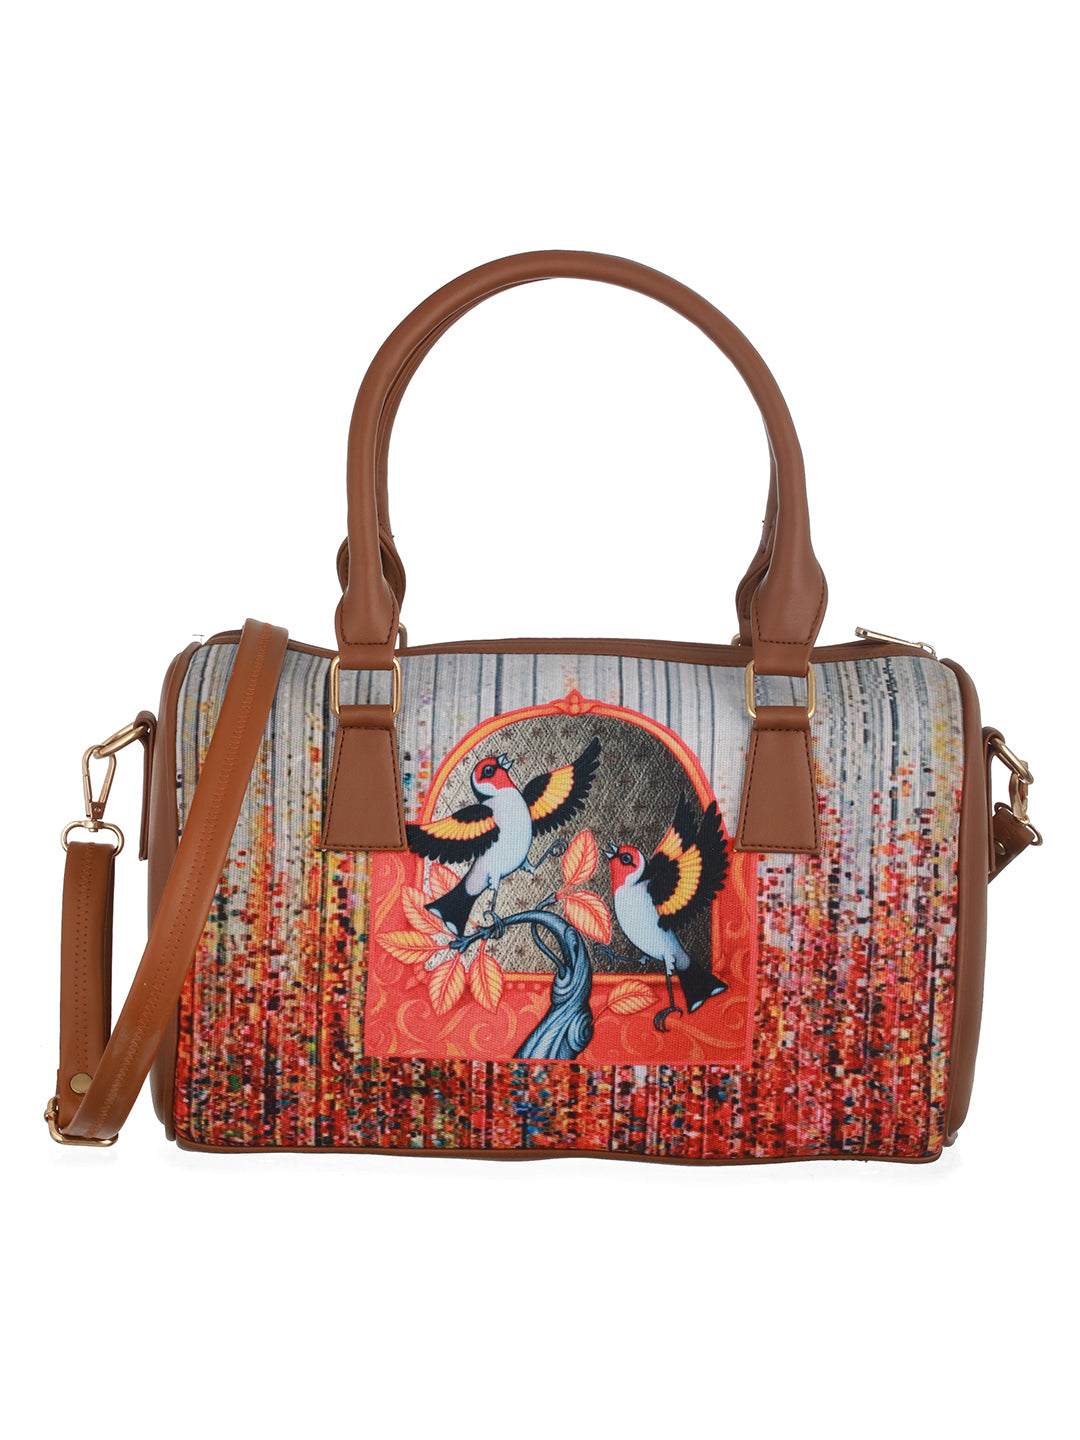 Bird Motif-Printed Fabric Embroidered Handheld Bags - Jazzandsizzle